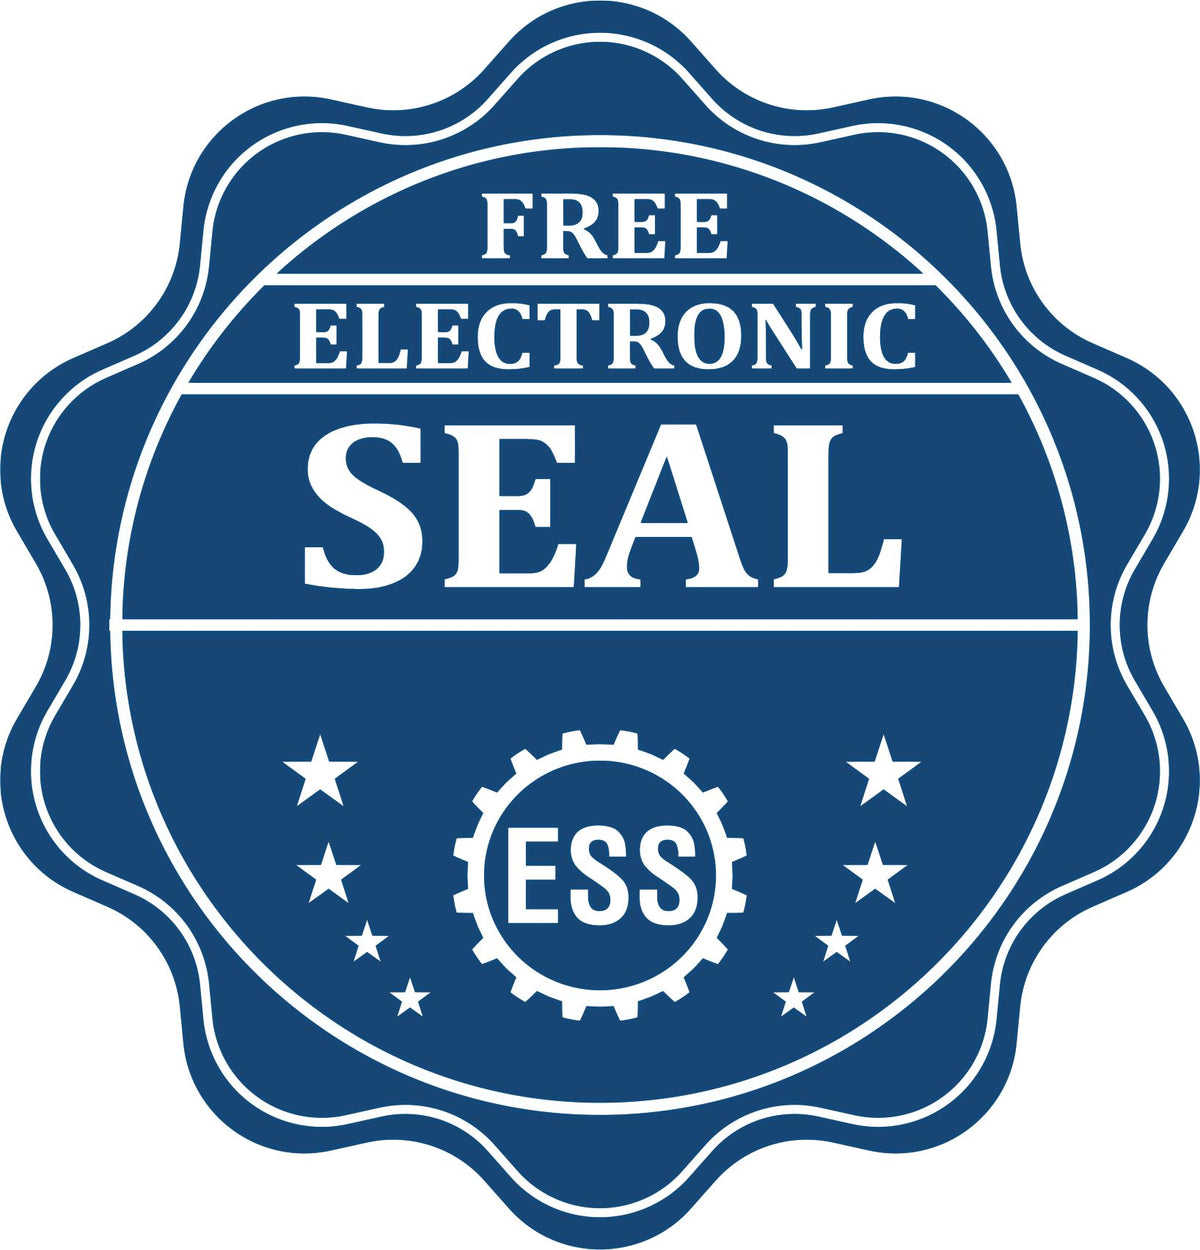 A badge showing a free electronic seal for the Long Reach Maine PE Seal with stars and the ESS gear on the emblem.